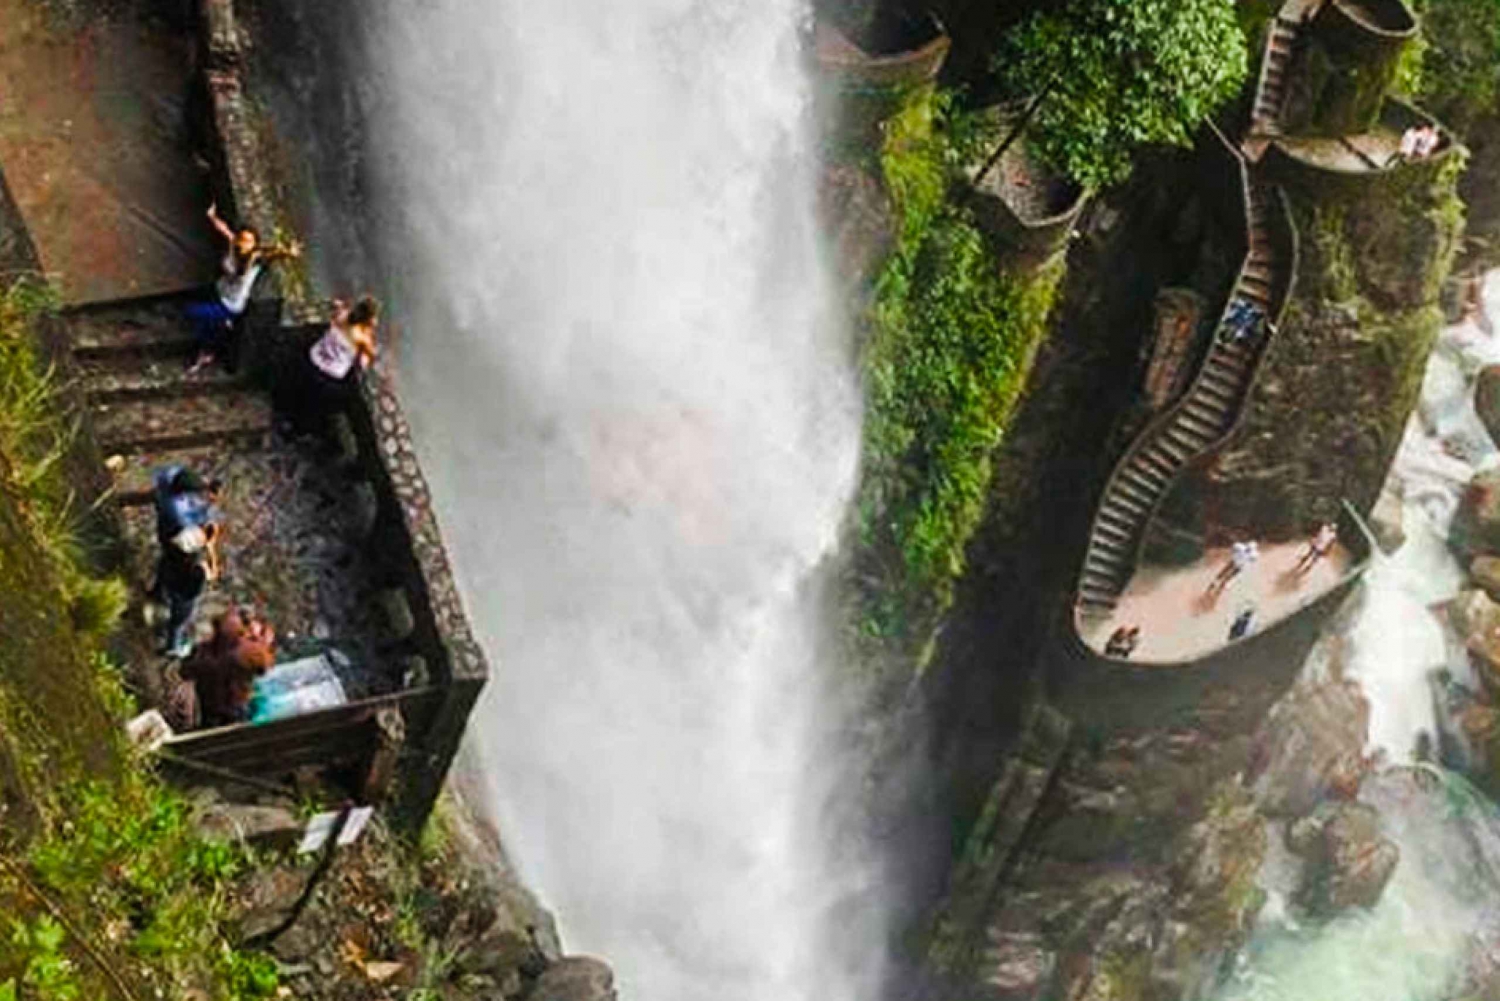 Baños 3Day/2Night Tour - All included tours